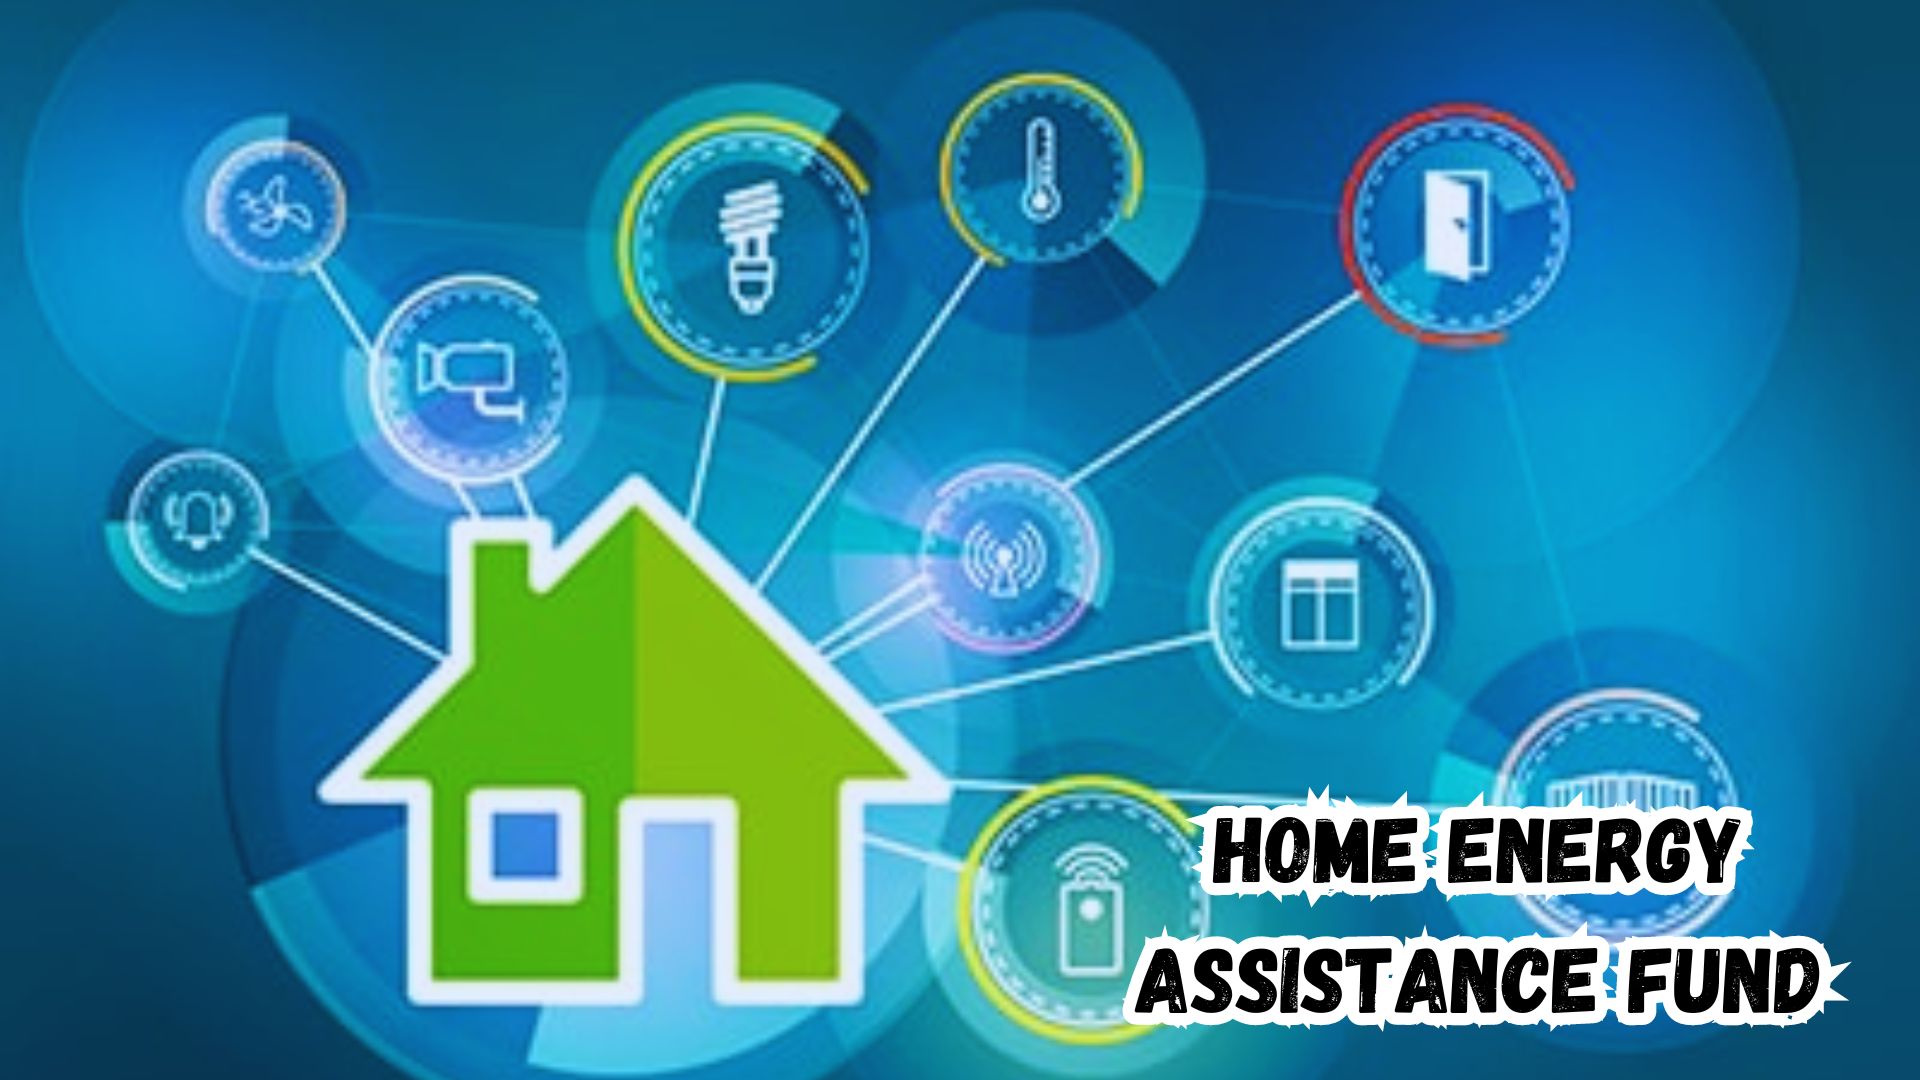 Home Energy Assistance Fund.